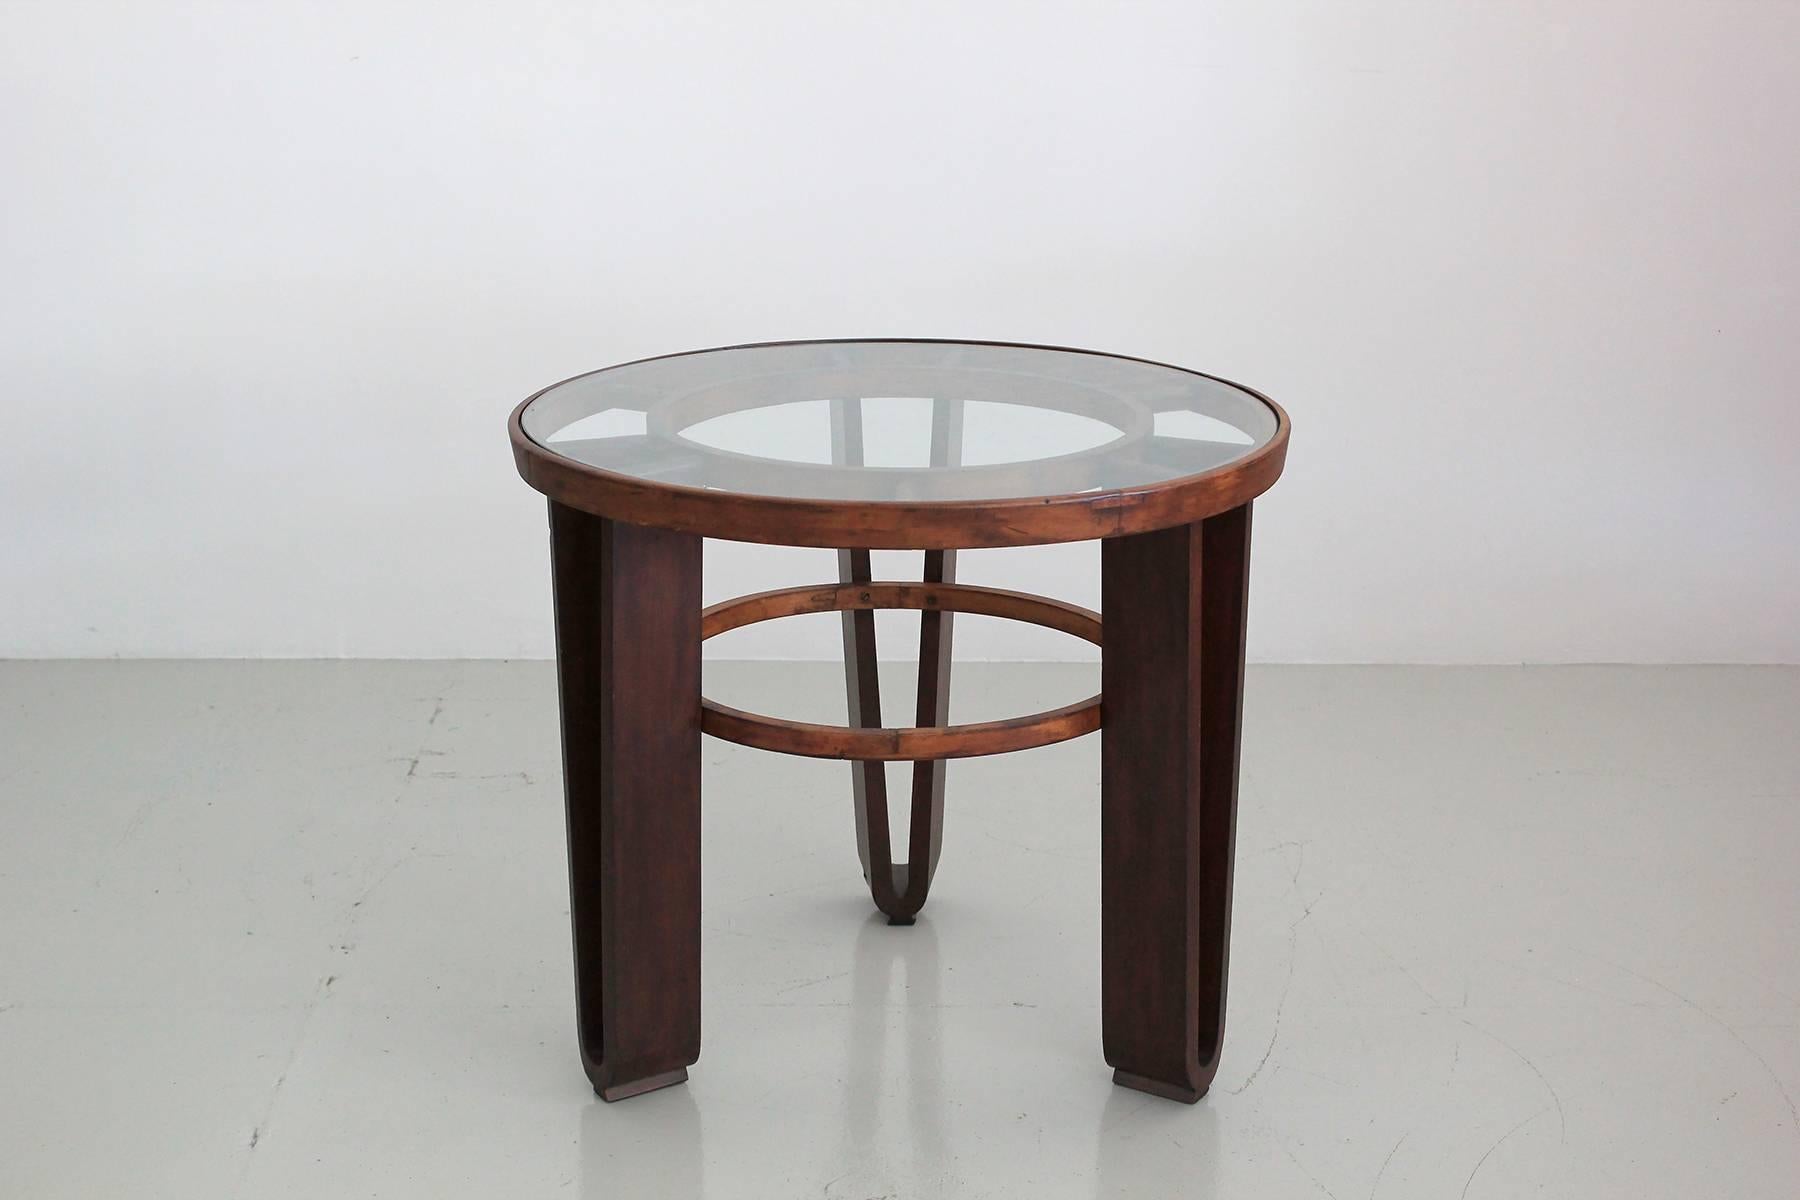 Gorgeous 1940s Italian table constructed entirely of different Italian woods. Including nutwood. 
Wonderful deco design with glass top.